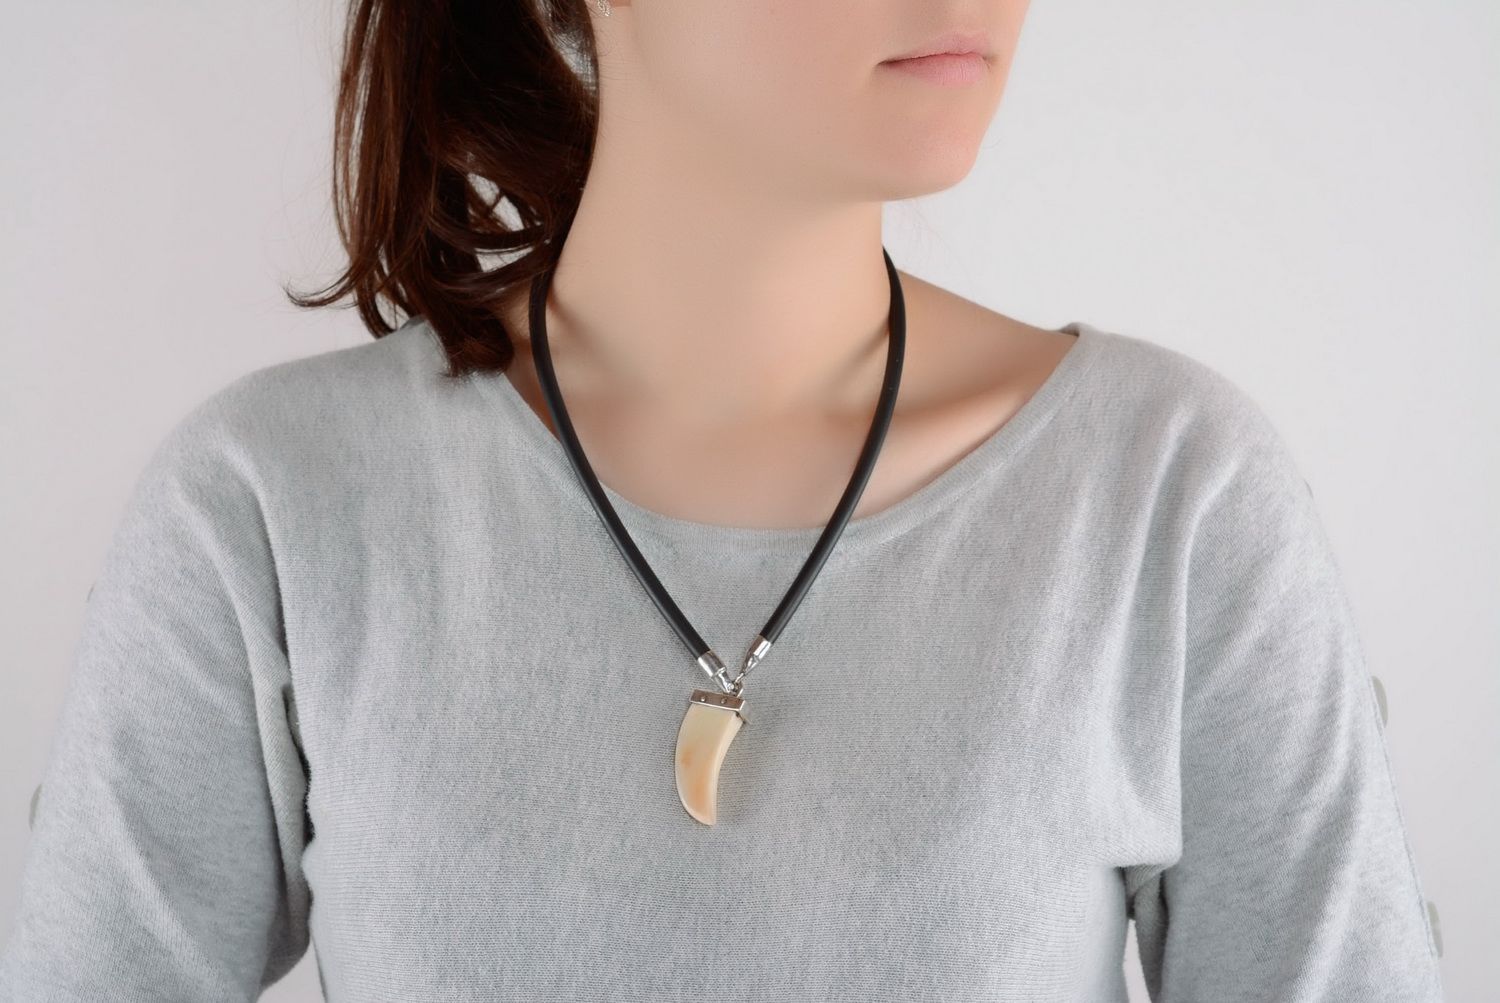 Pendant made of a wild boar's tusk photo 1